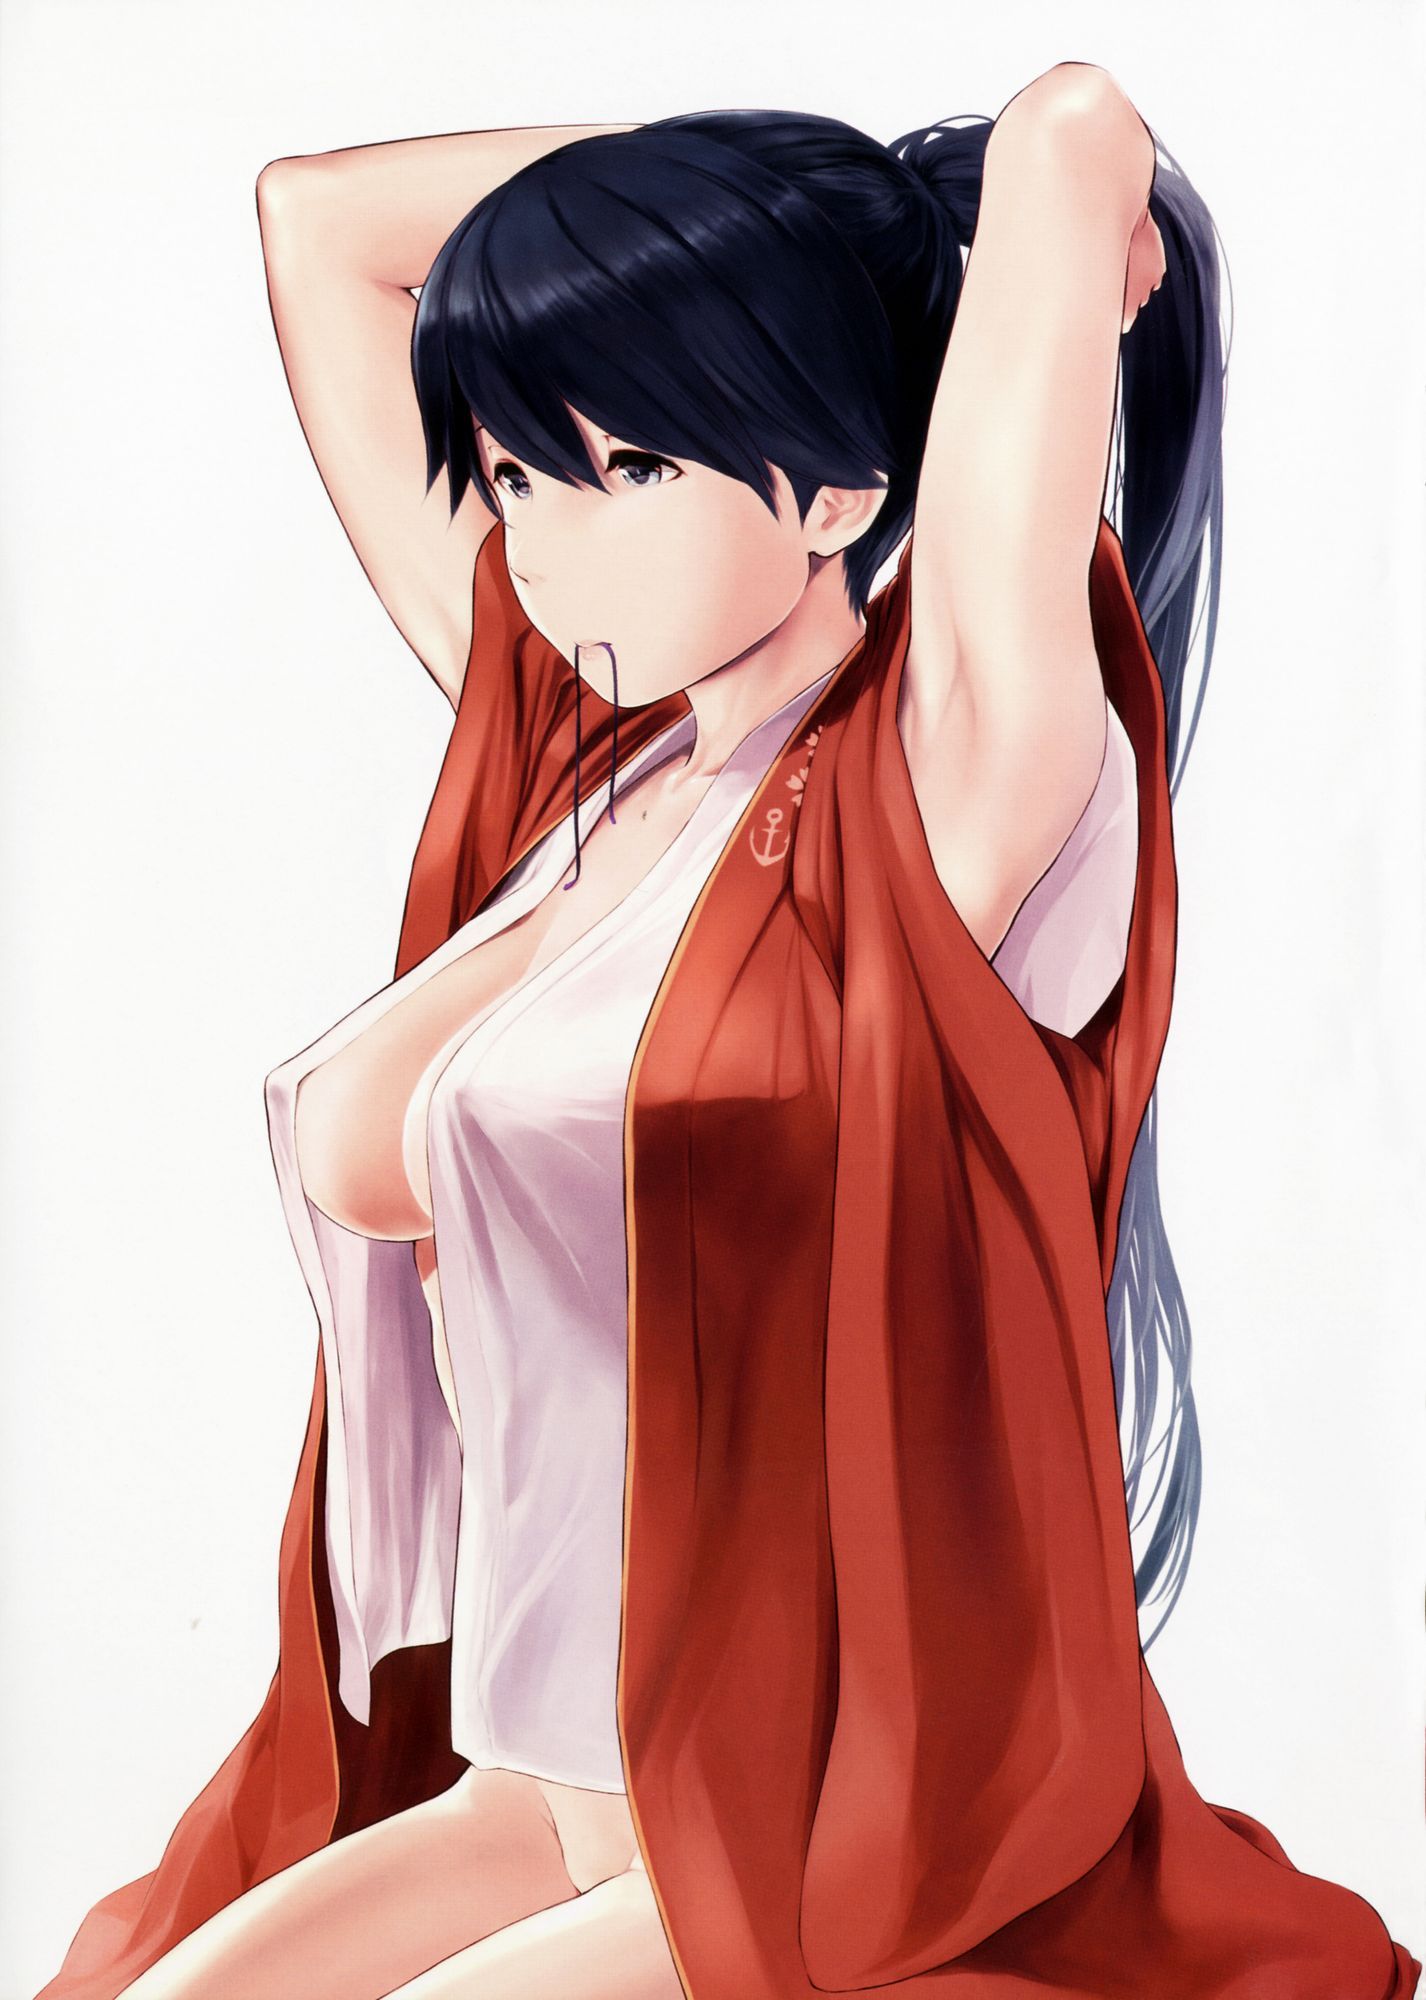 [2nd] Secondary erotic image of a girl who is going to see the armpit 4 [Waki] 1